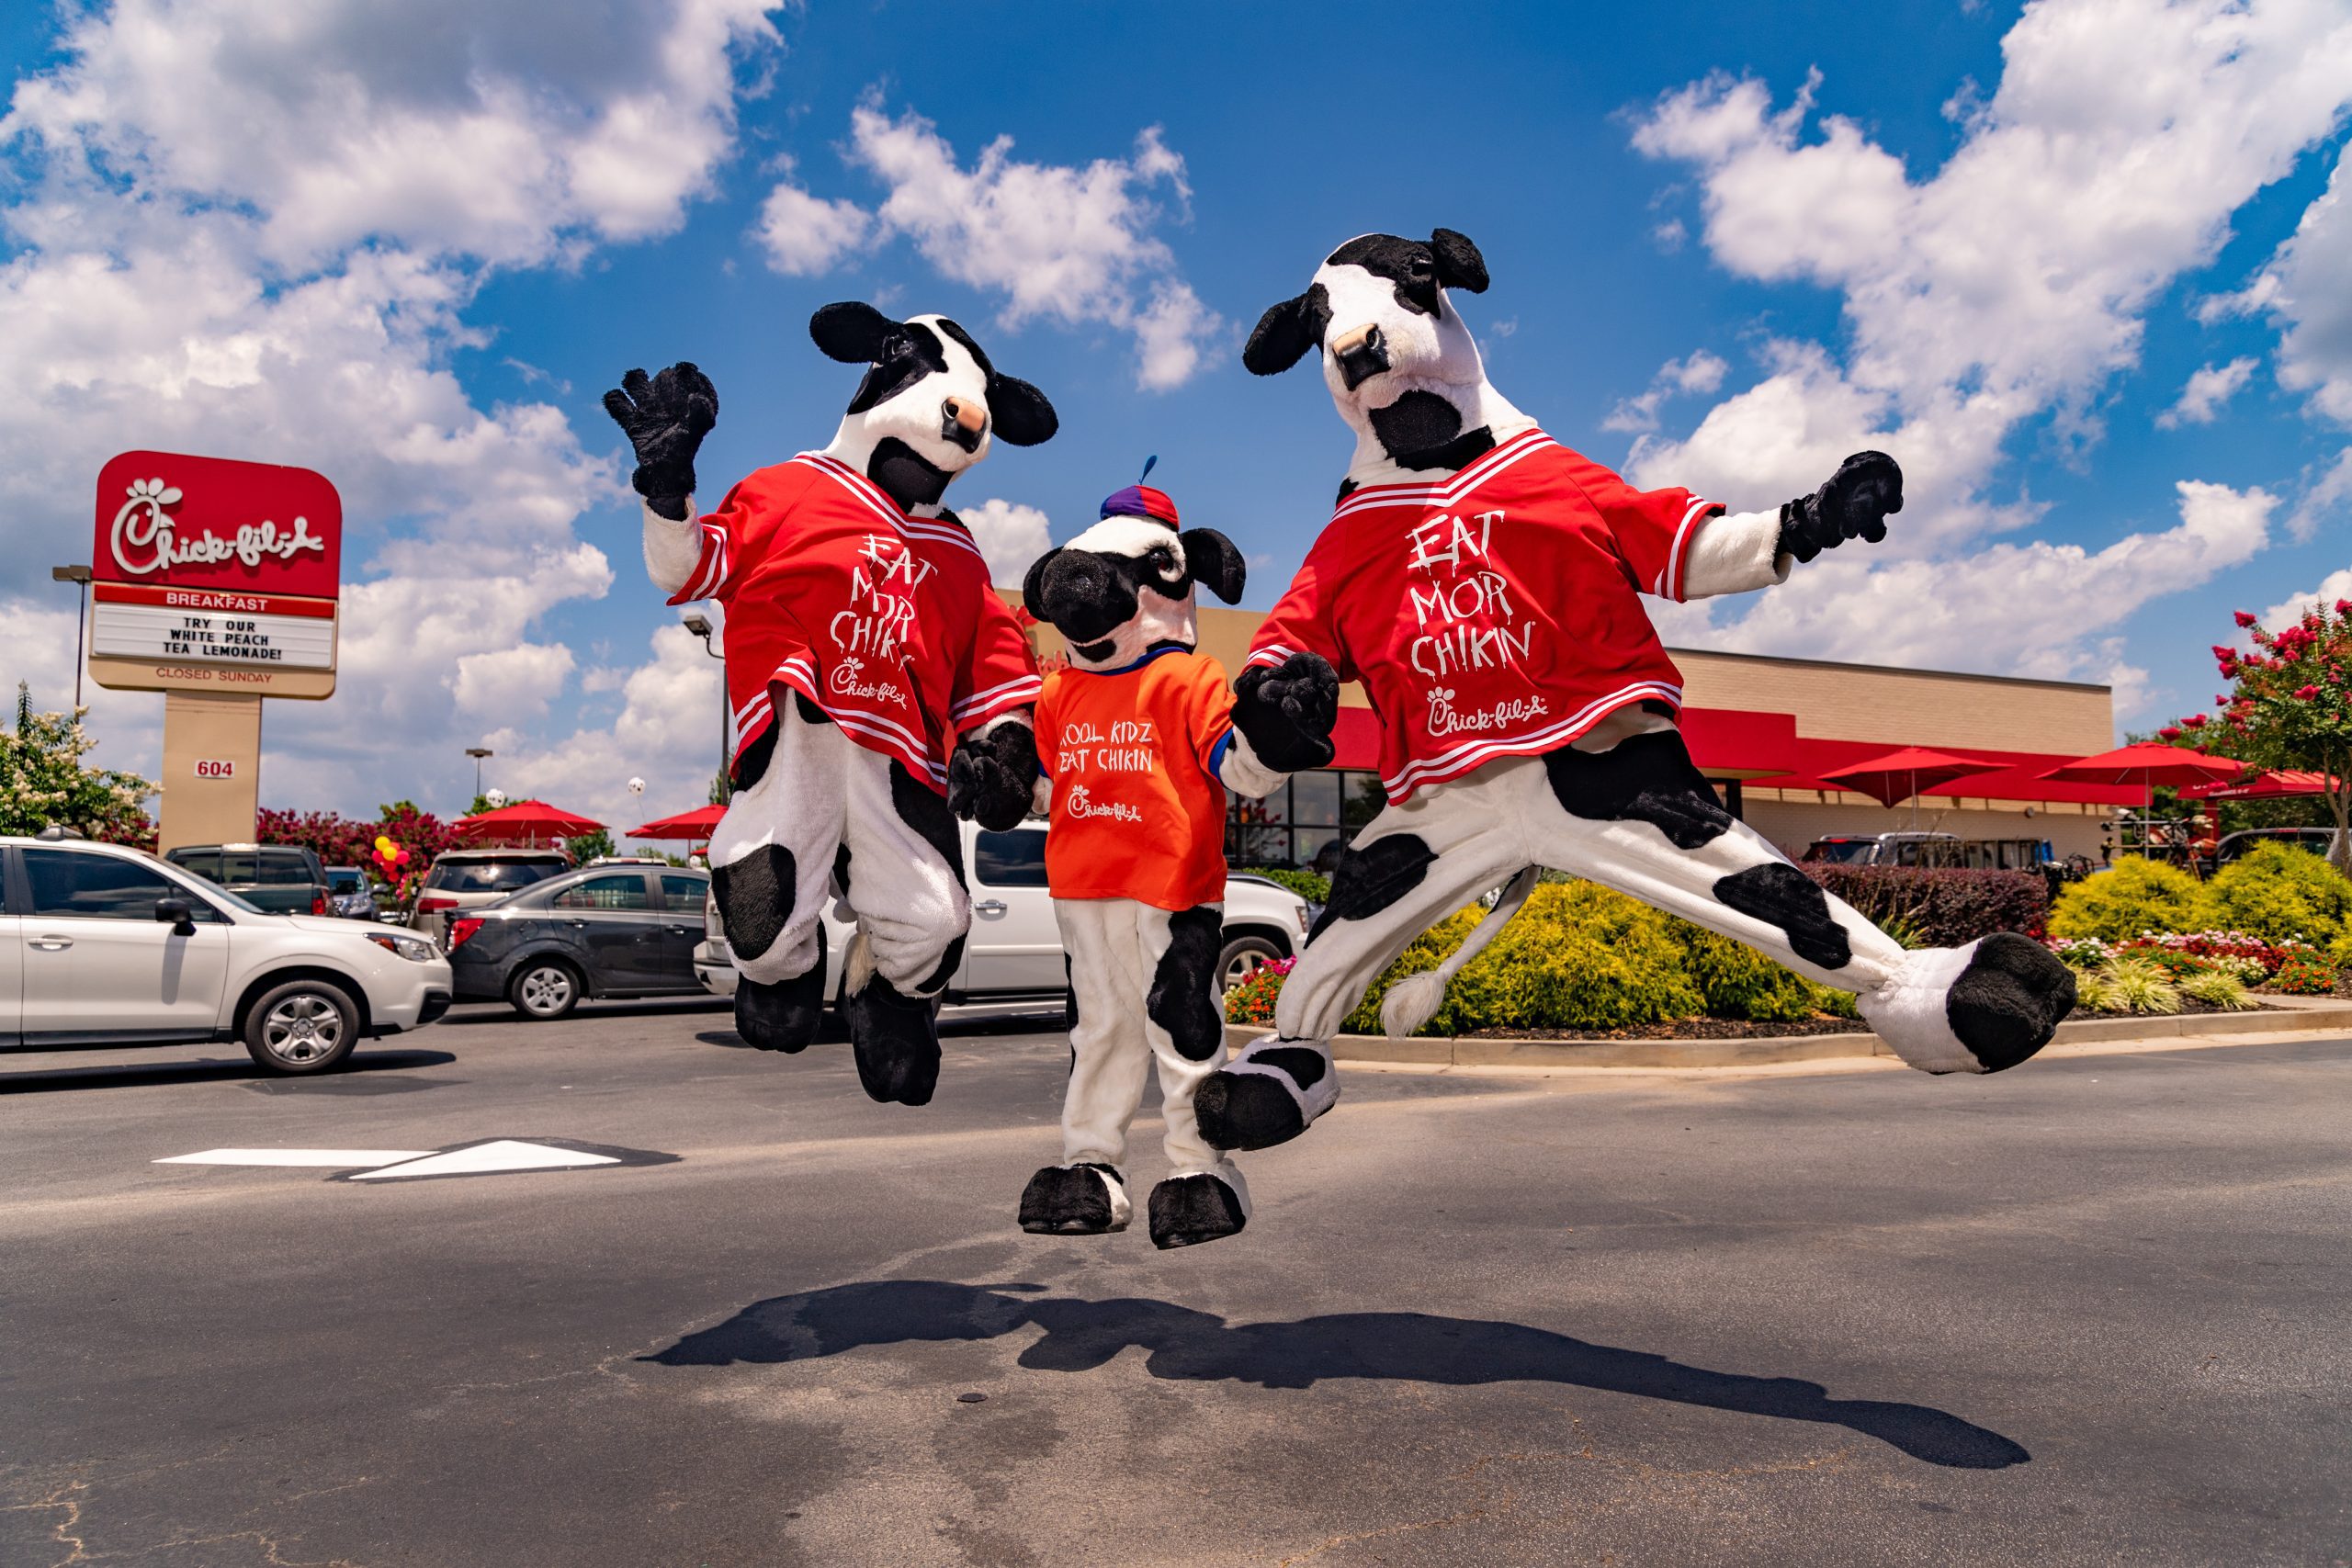 The creator of the Cow Campaign for Chick-fil-A